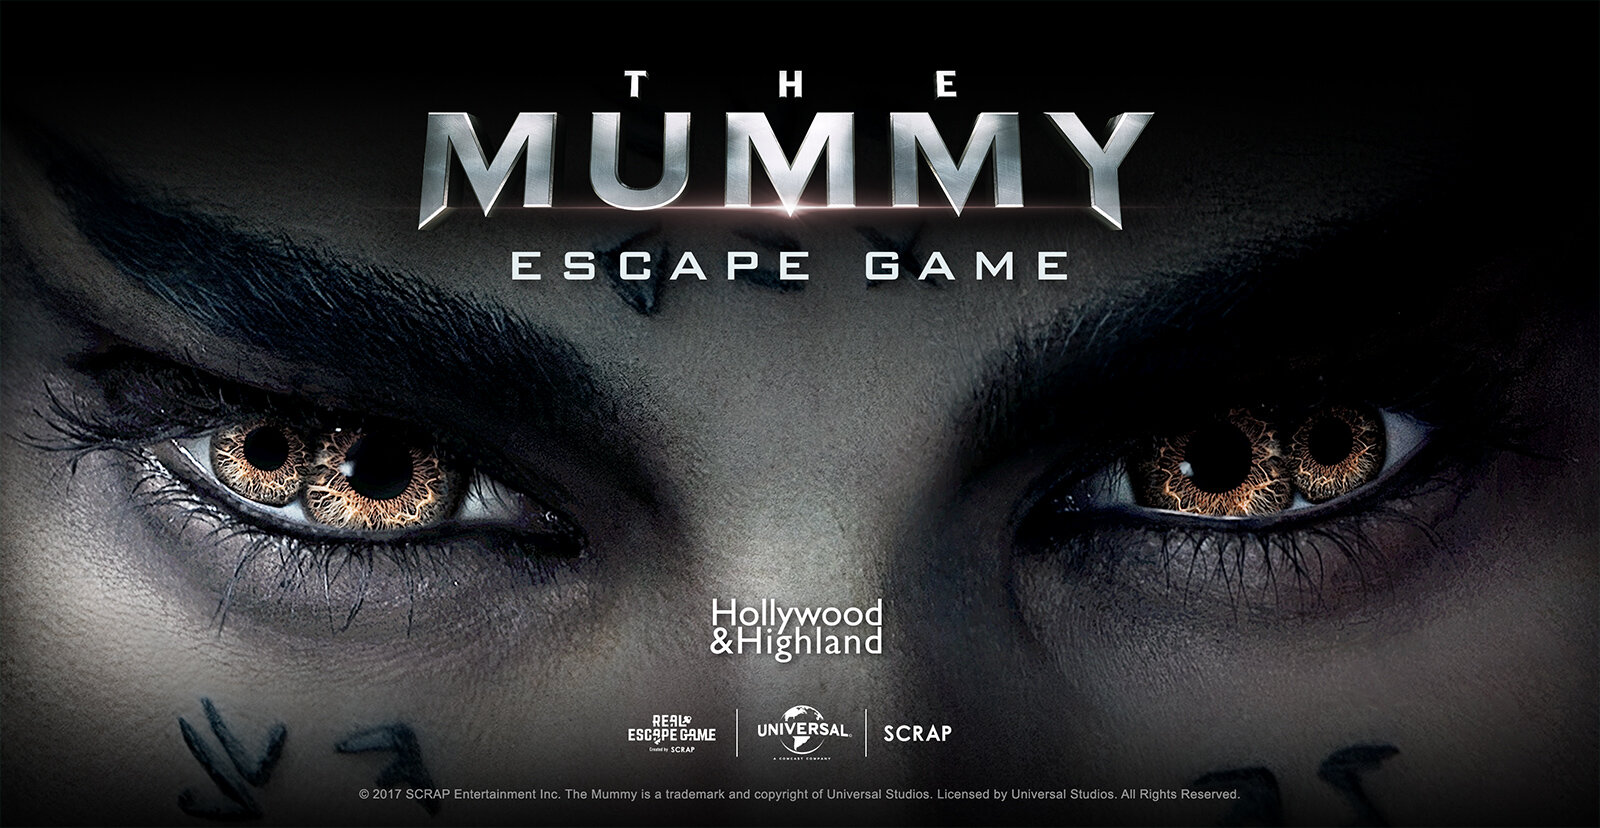 The Mummy Escape Game: Hollywood and Tokyo